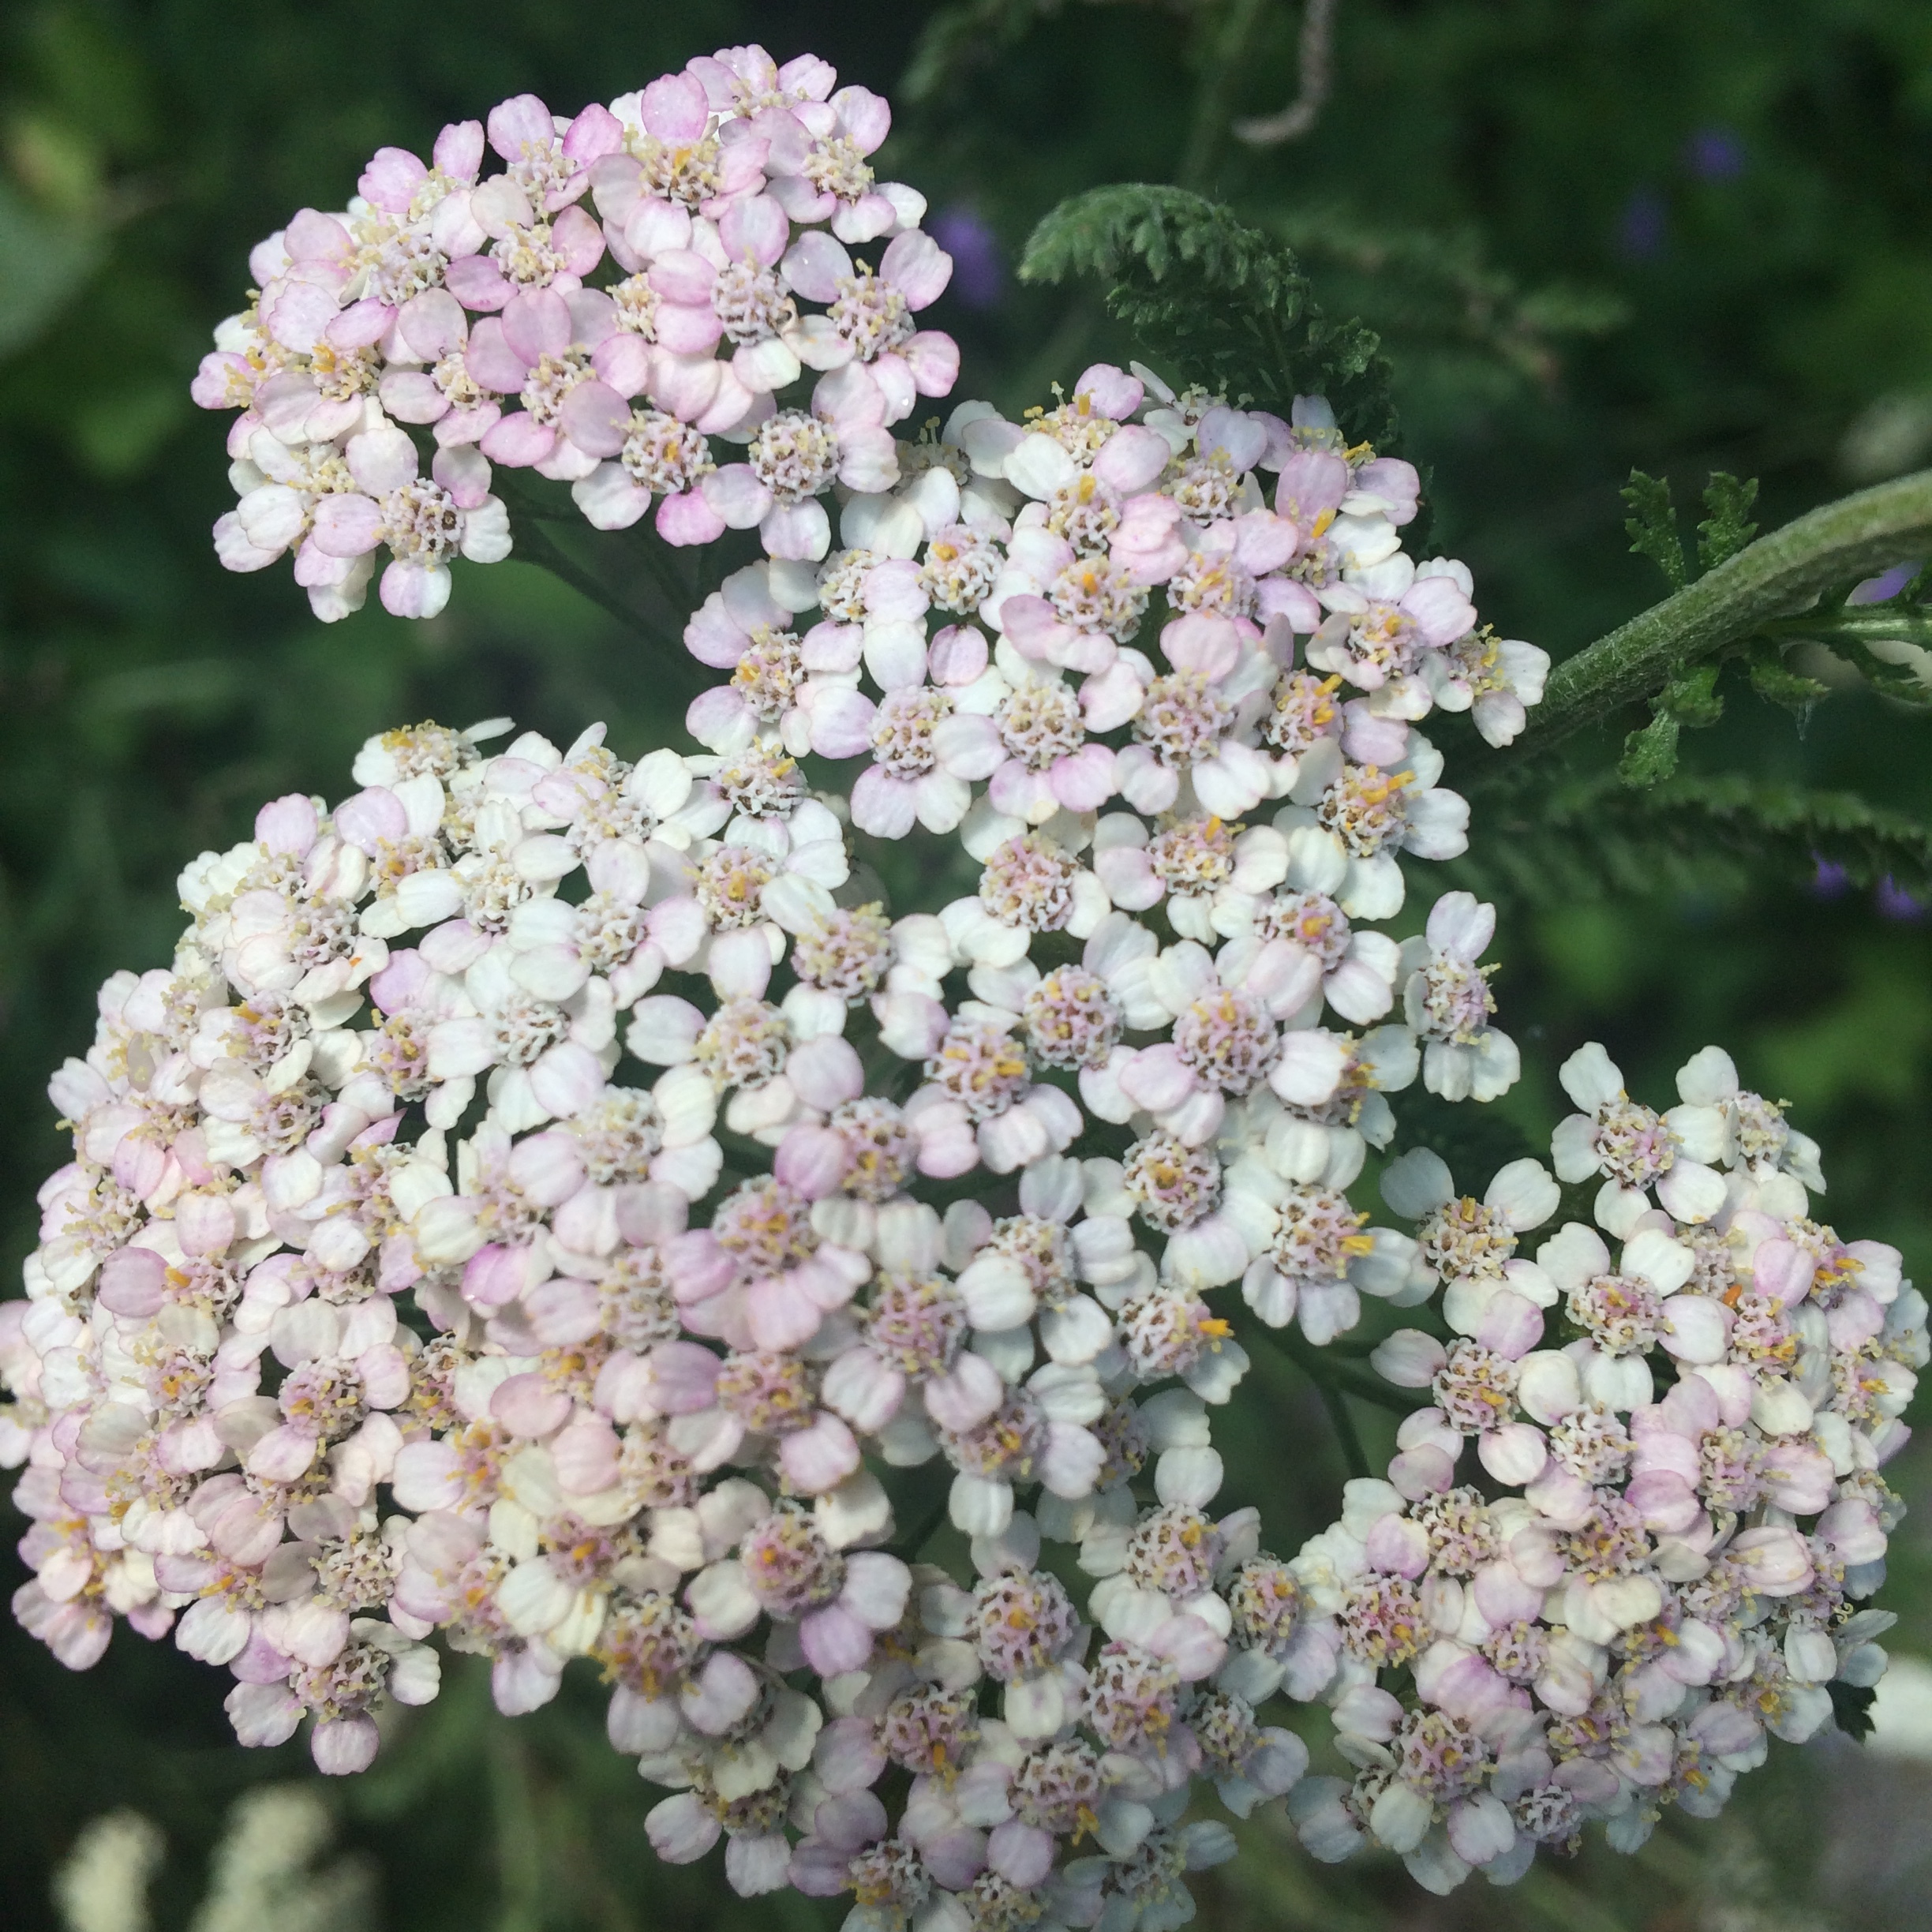 Yarrow Flower with Pink Tint